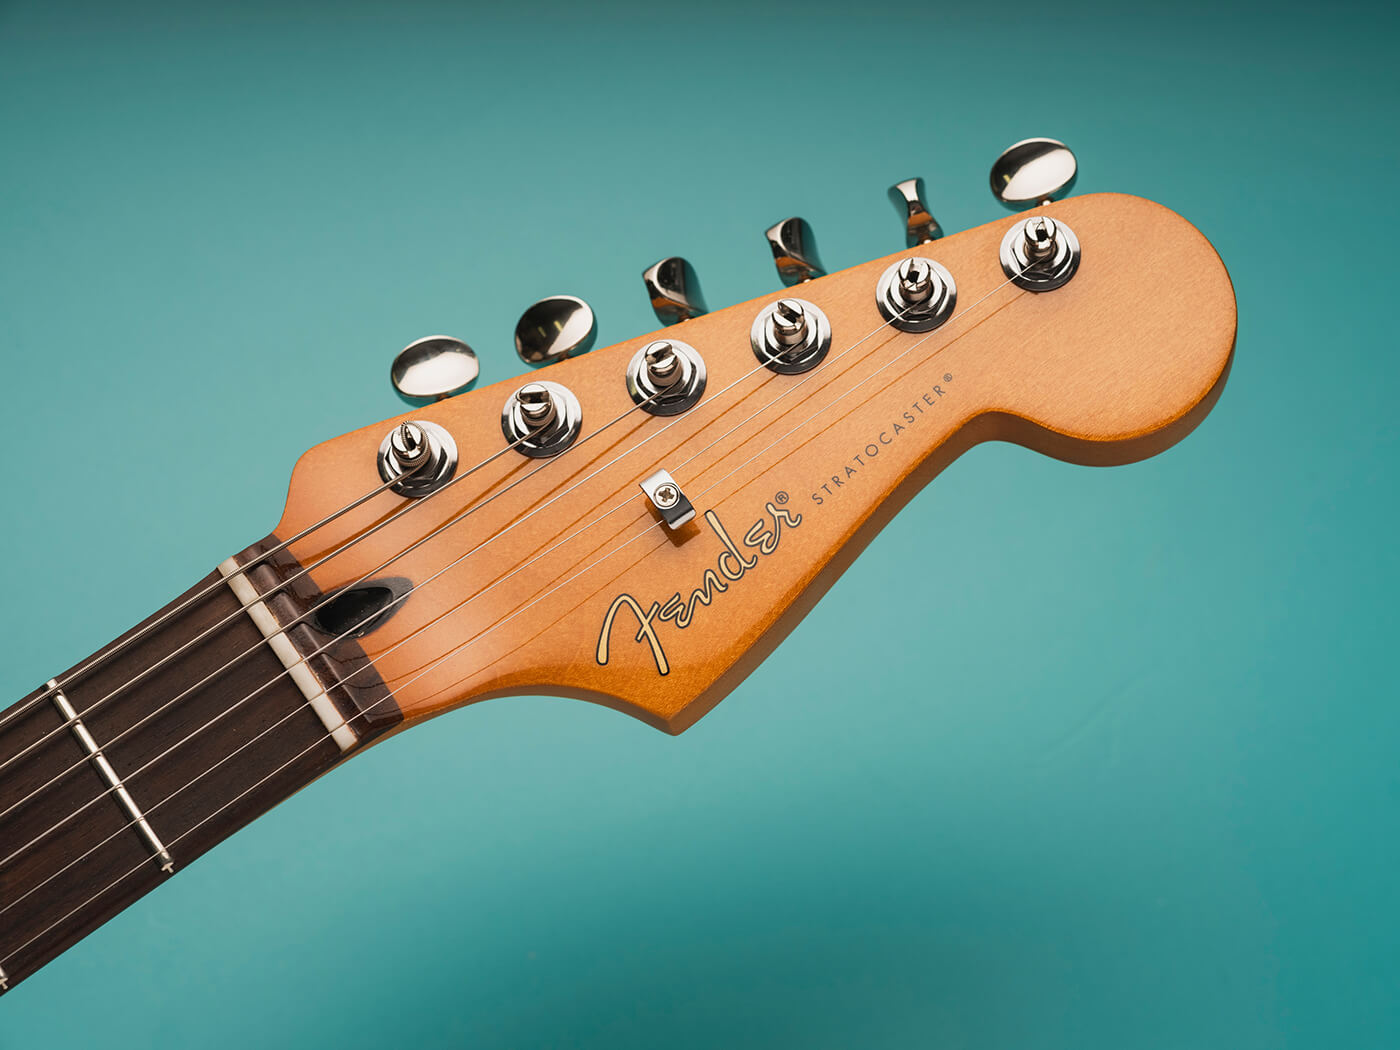 70th Anniversary Player Stratocaster headstock, photo by Adam Gasson